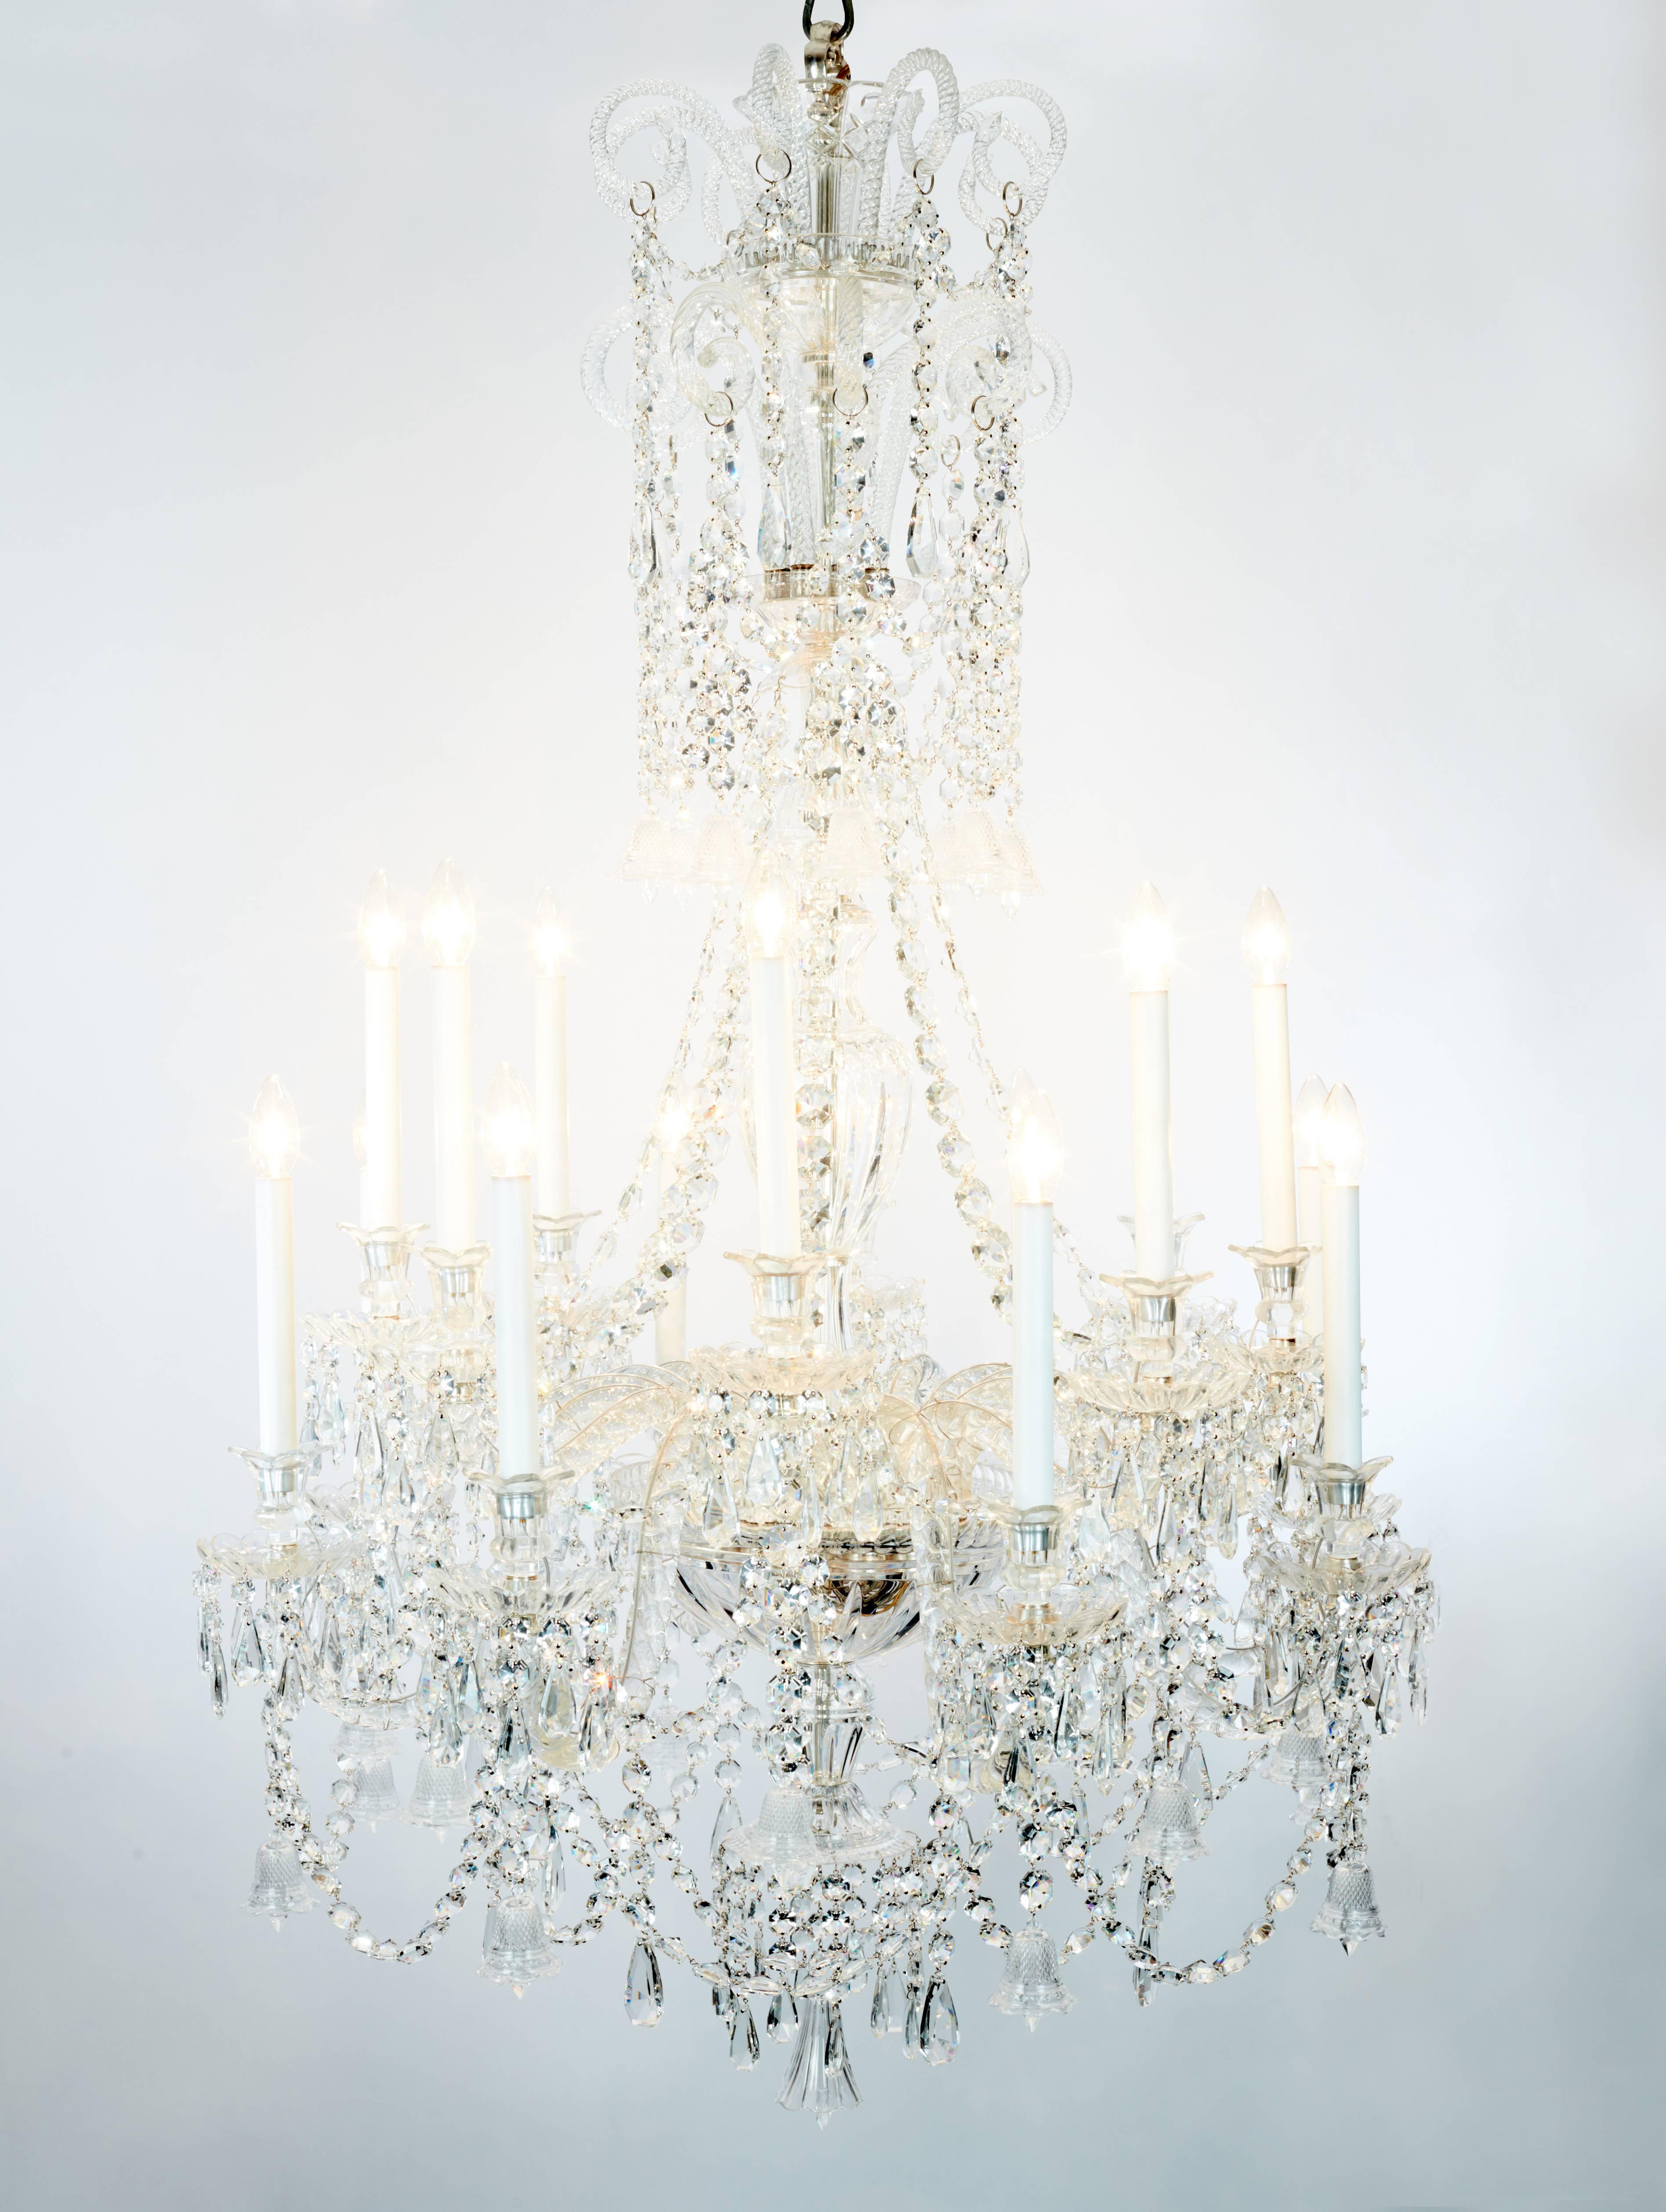 A pair of beautiful Baccarat chandeliers with 16 twisted arms each terminating in a crystal bobeches and recently rewired candle bulb holder. Each arm is linked with crystal drops and crystal bells. The crown features barley twists with cascading